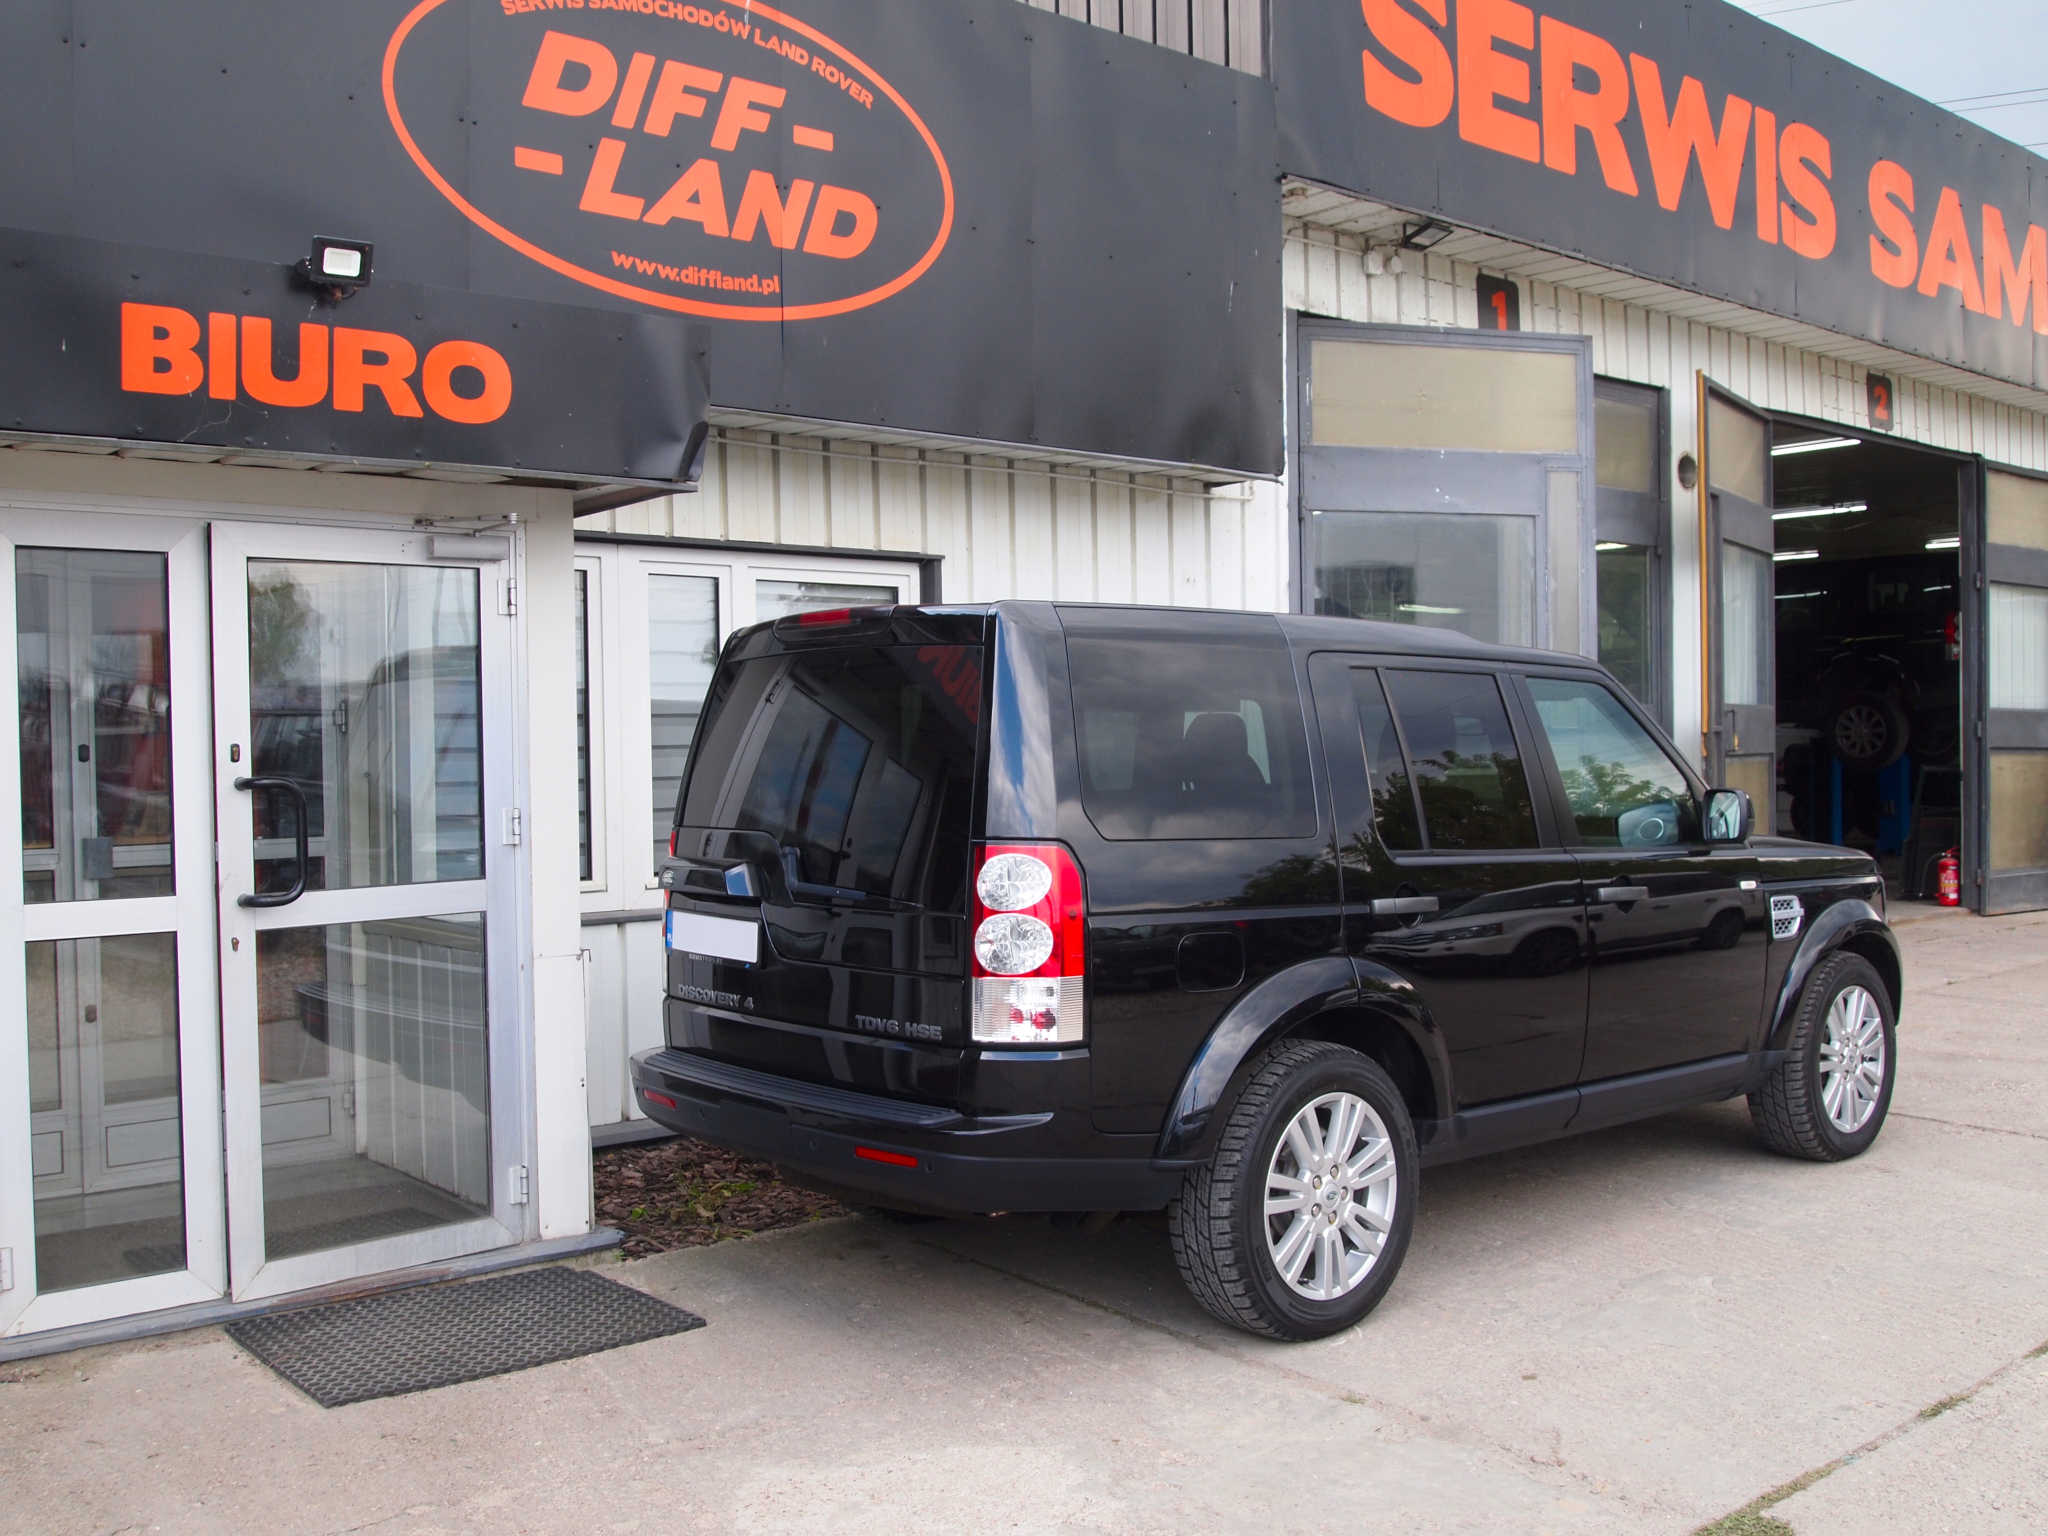 Land Rover Discovery IV 2011 diffland.pl Serwis